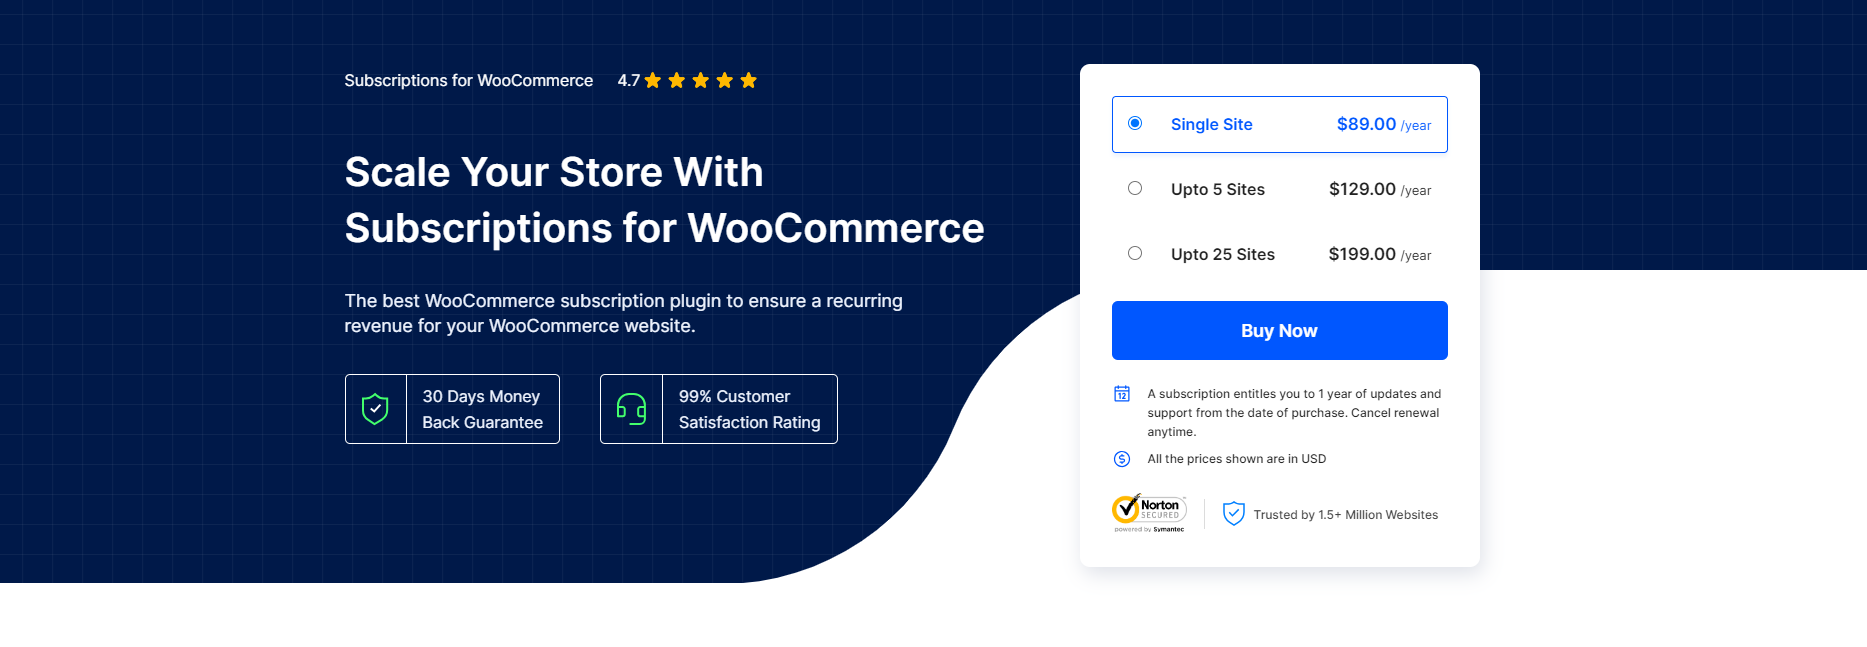 Subscriptions for WooCommerce